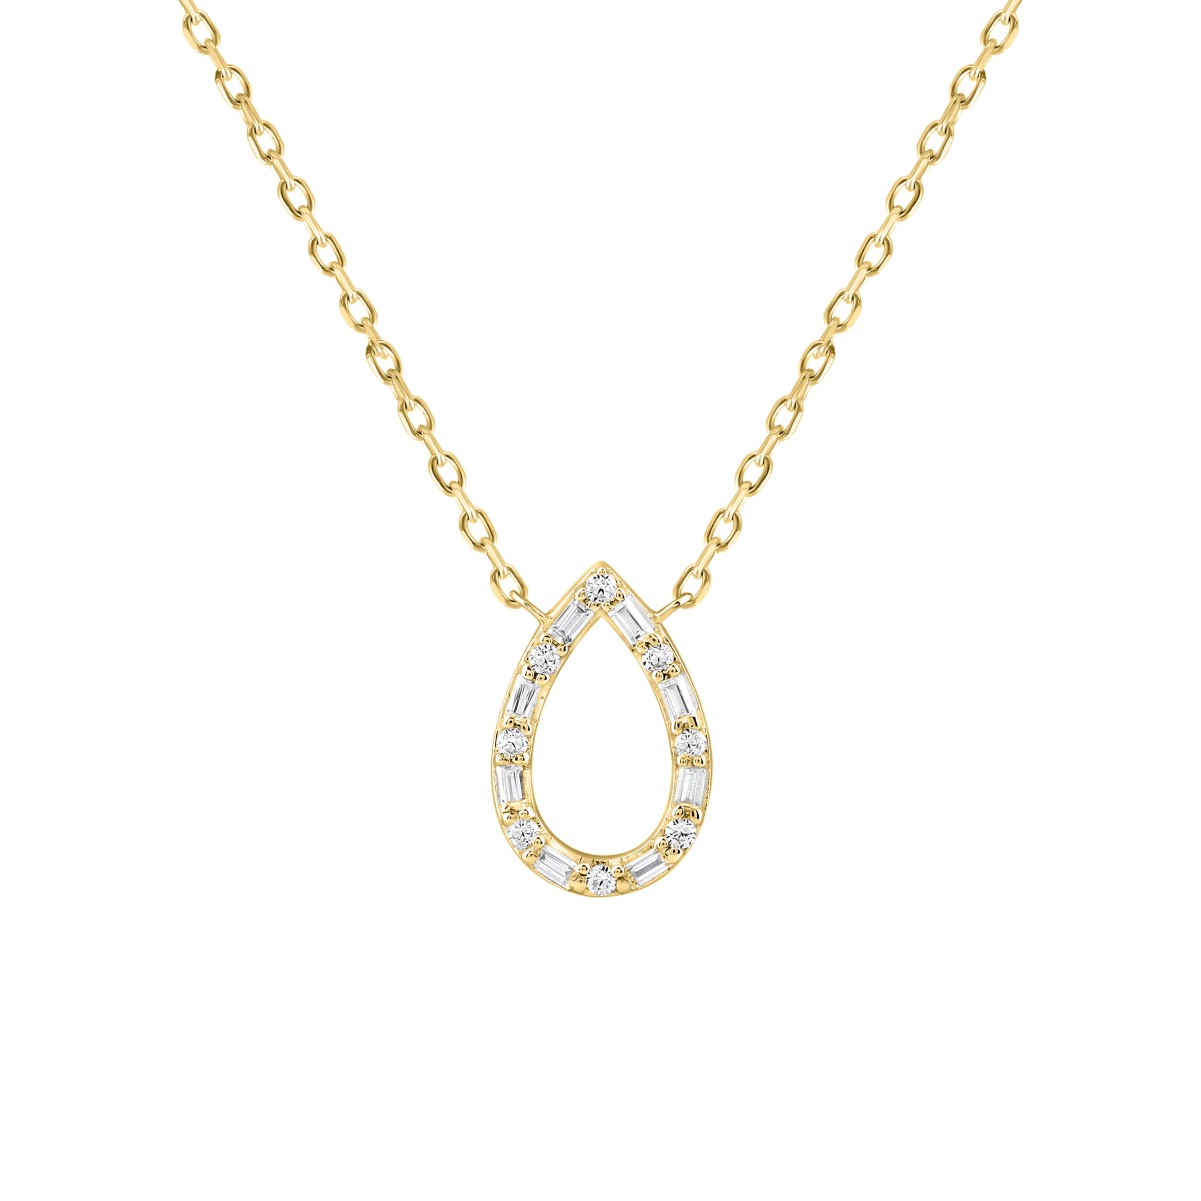 18K YELLOW GOLD 1/6CT ROUND/BAGUETTE DIAMOND LADIES PENDANT WITH CHAIN  